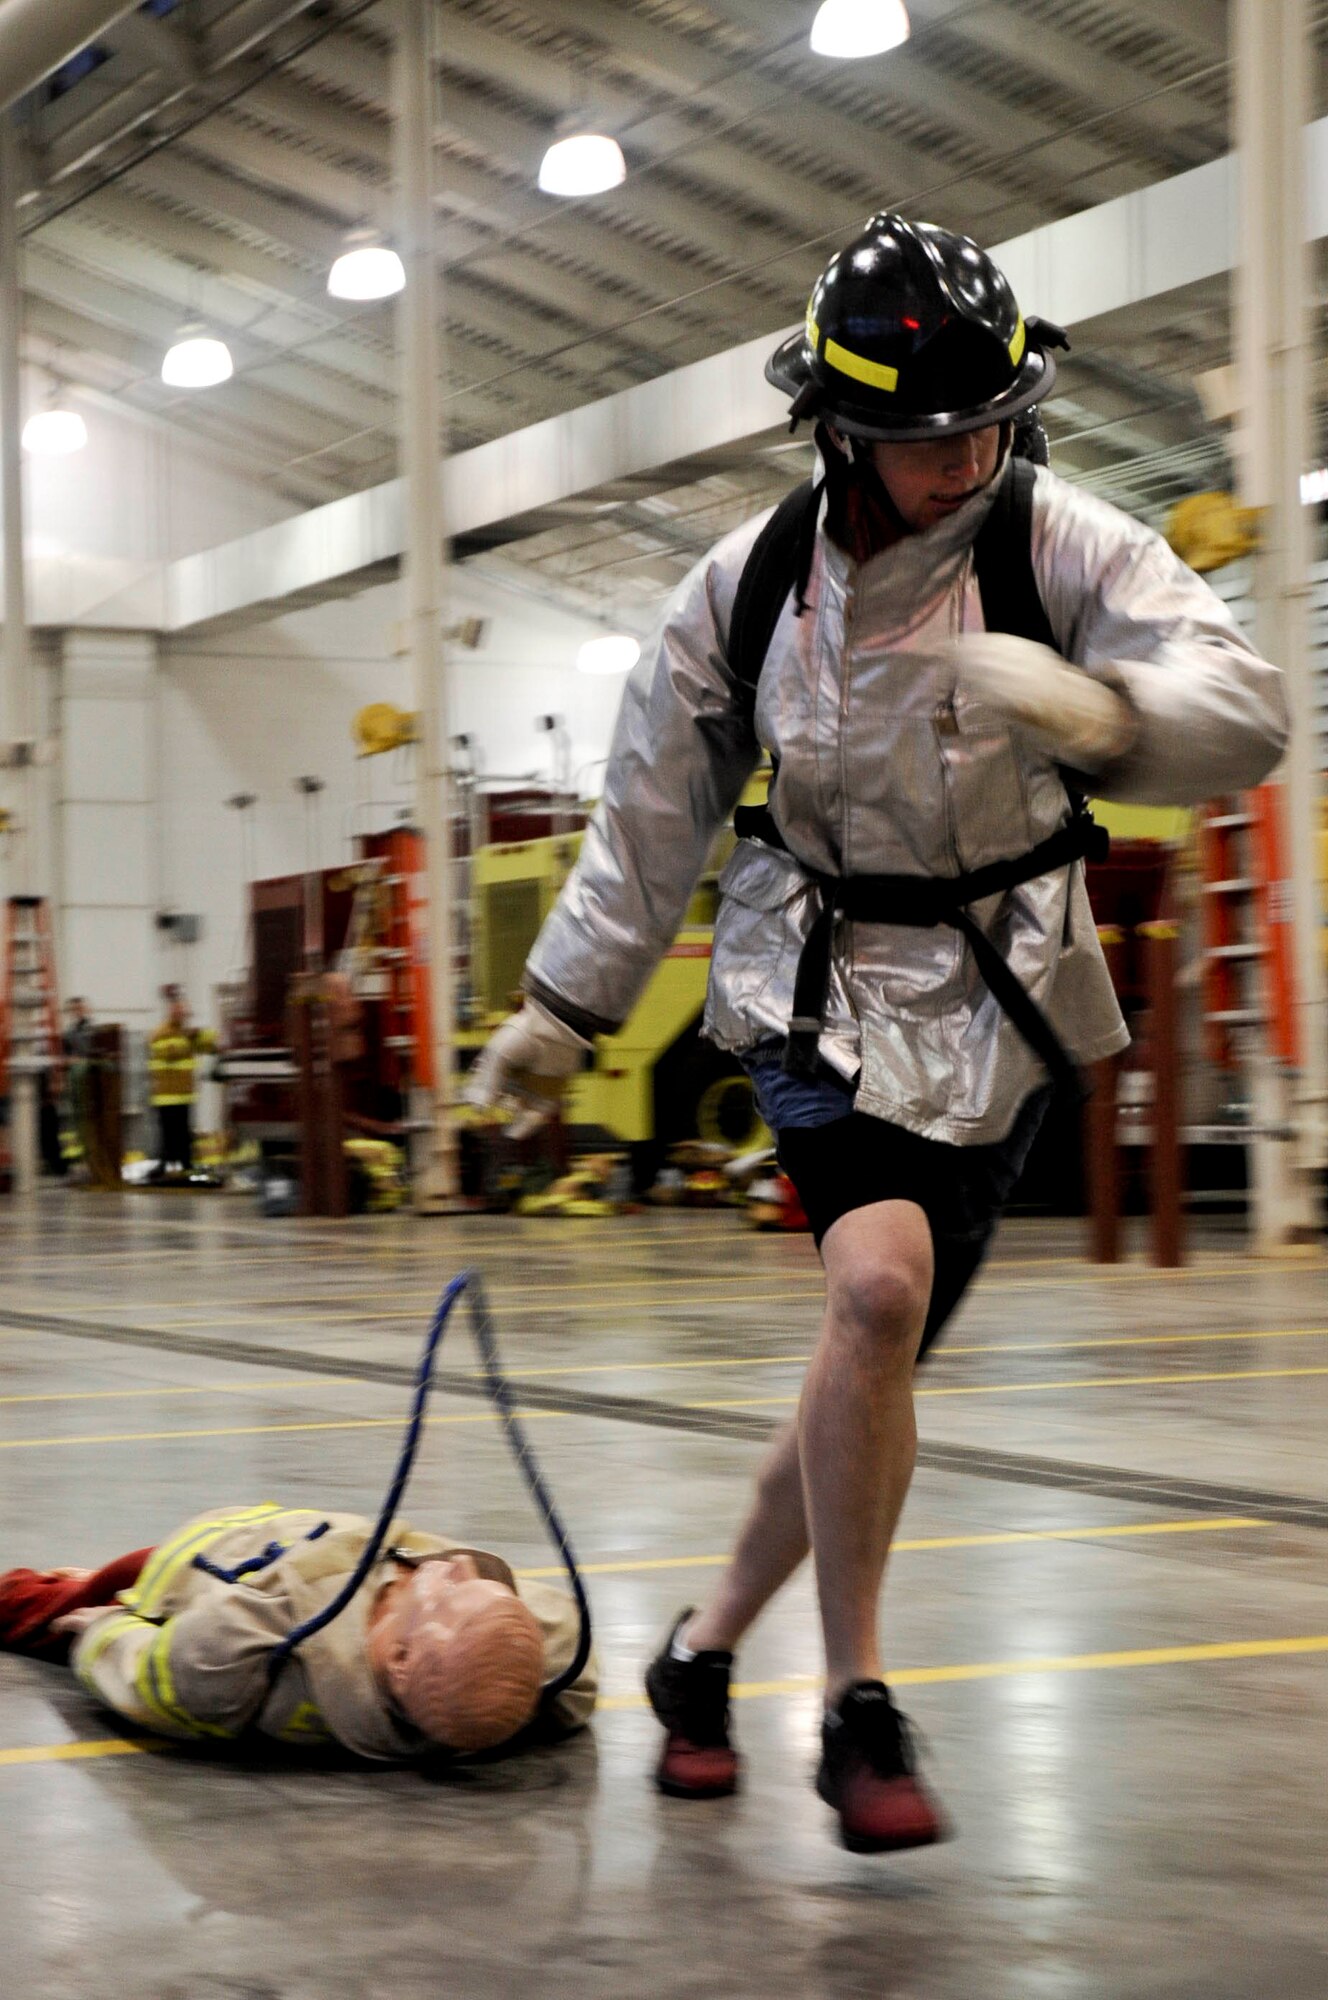 Airman 1st Class Clint Hubkey, 28th Civil Engineer Squadron heating, venting, air conditioning systems technician, drags a dummy during a Firefighter Challenge at the fire station at Ellsworth Air Force Base, S.D., Oct. 5, 2012. Participants from a variety of units from around the base had the opportunity to participate in several events including a hose drag, ladder climb and pack hoist. (U.S. Air Force photo by Airman 1st Class Anania Tekurio/Released) 